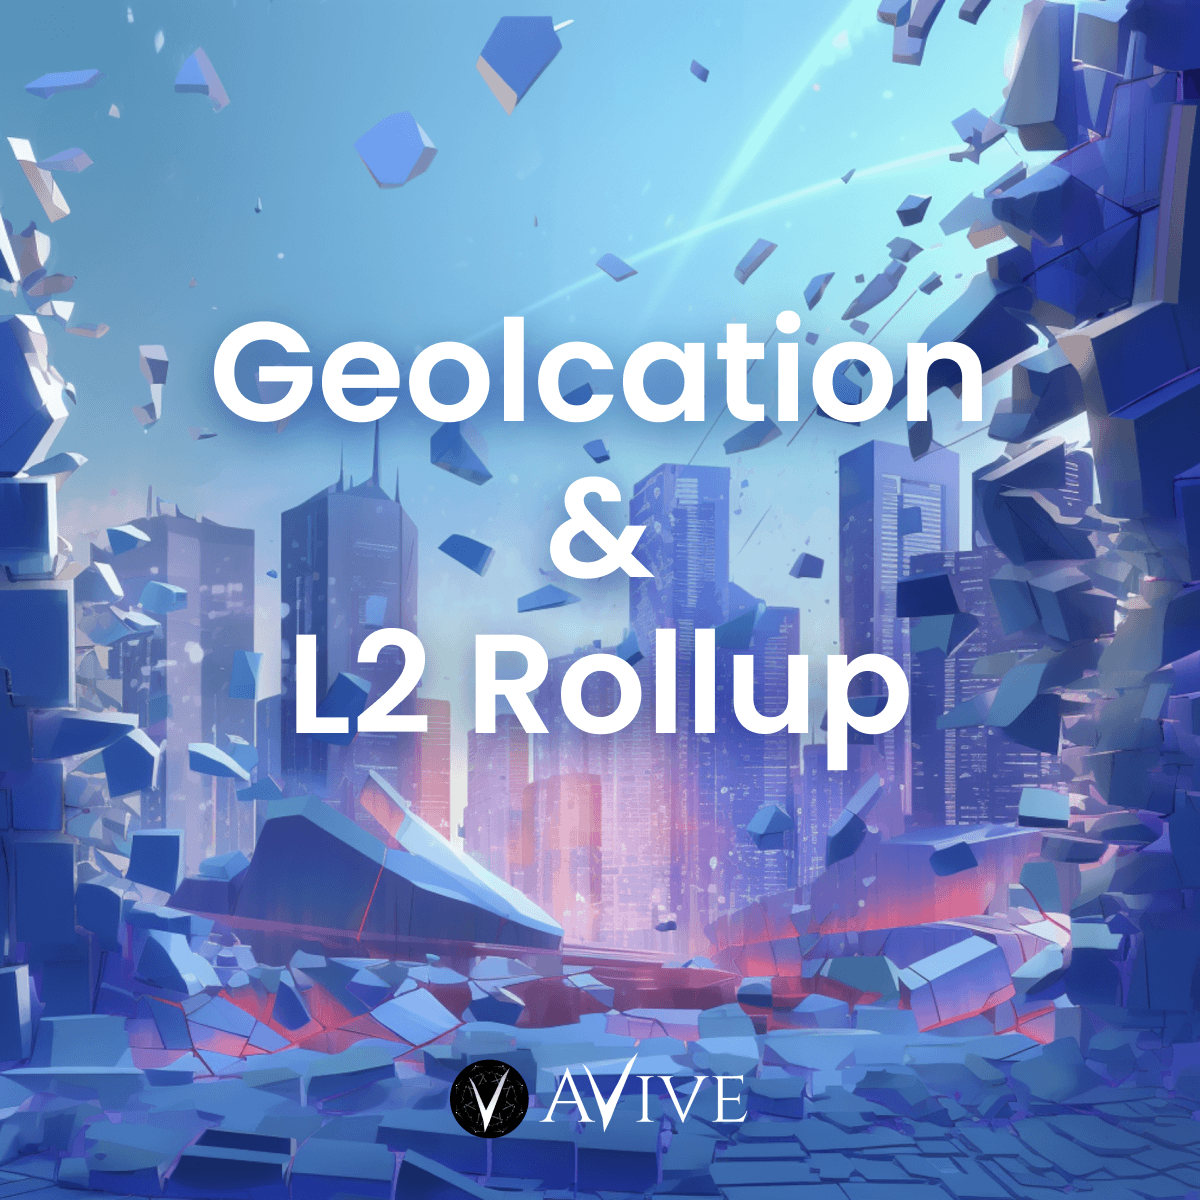 #Avive is a blockchain platform that combines geolocation and #Layer2 #Rollup to drive #web3 adoption. 

👉Our mission is to empower developers and engage billions of users.
 
✅Join the Avive revolution and step into the future of blockchain innovation!